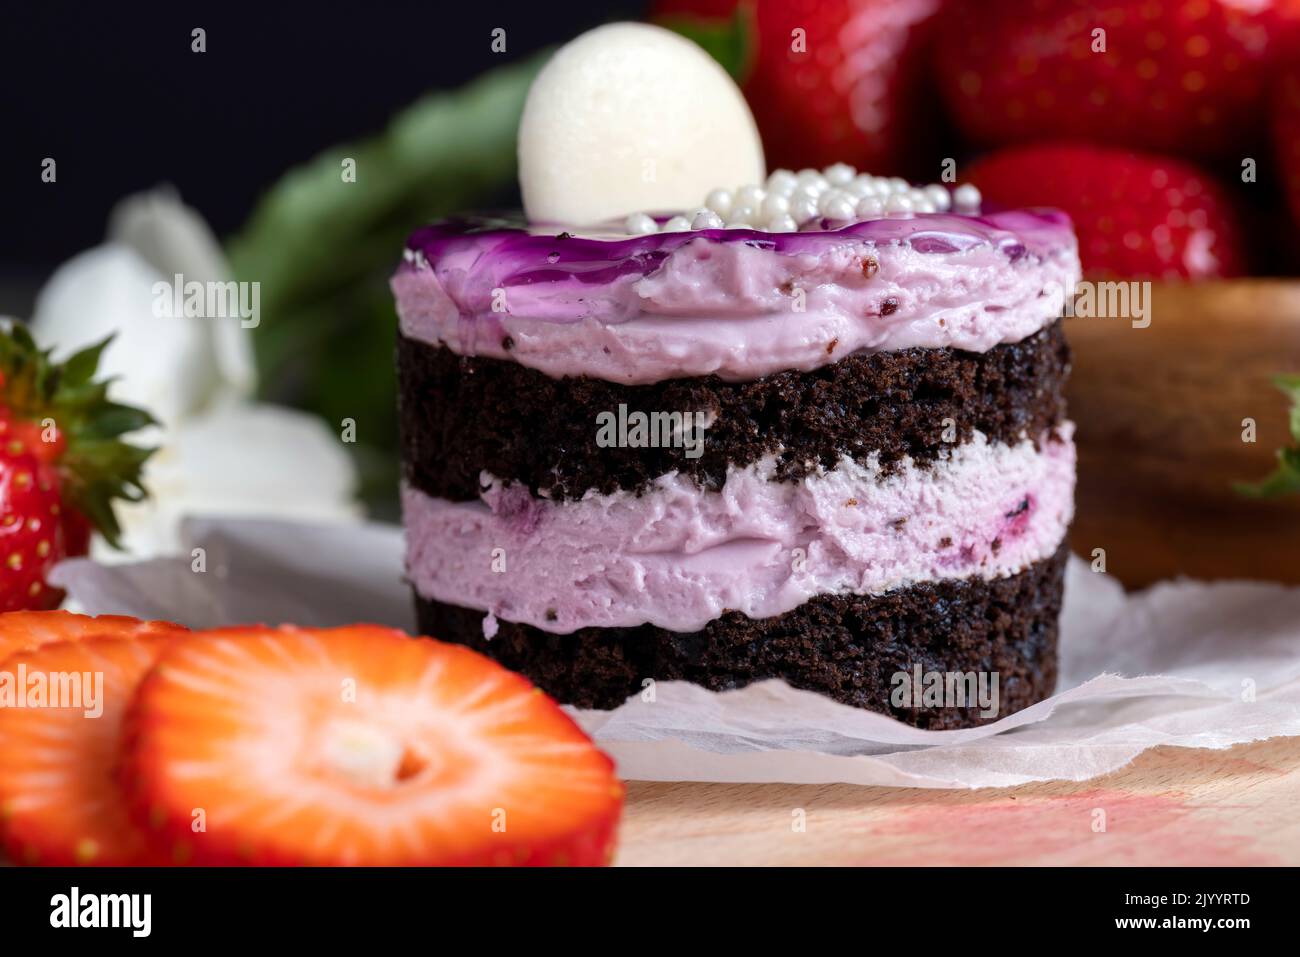 purple cake with berry flavor, sweet dessert cake with red strawberries Stock Photo